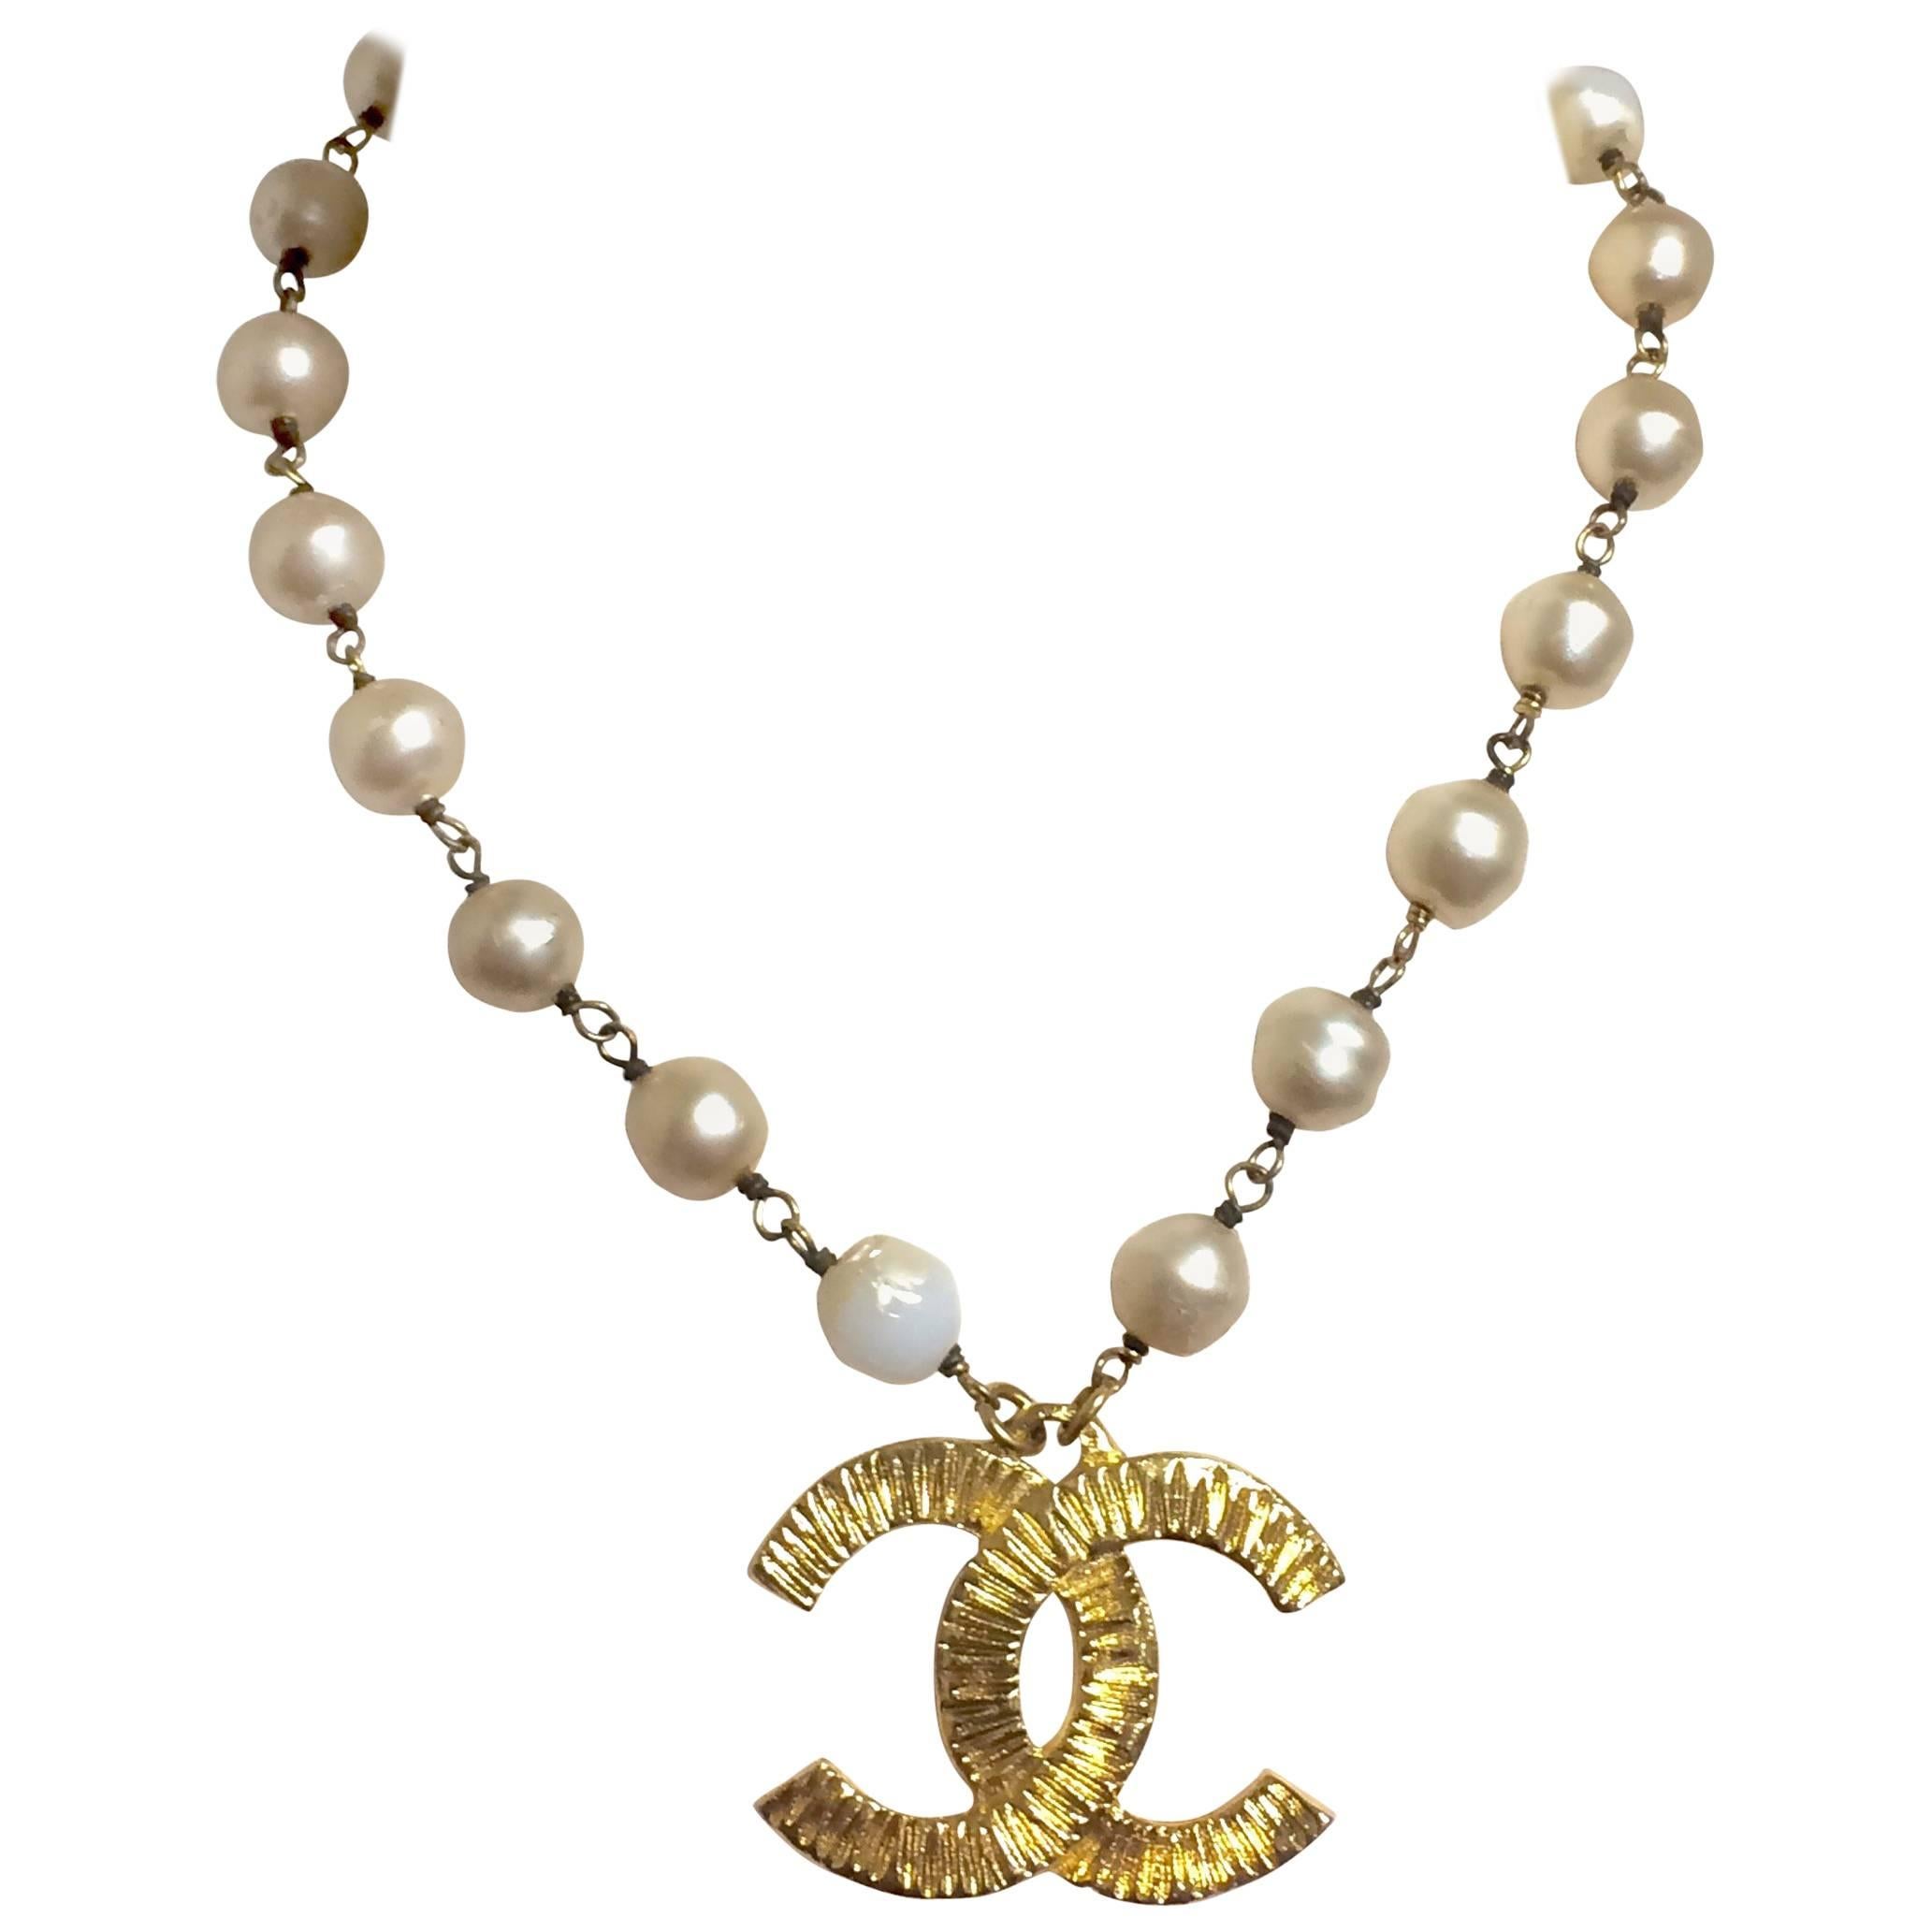 Vintage CHANEL white cream faux baroque pearl necklace with CC mark pendant top.